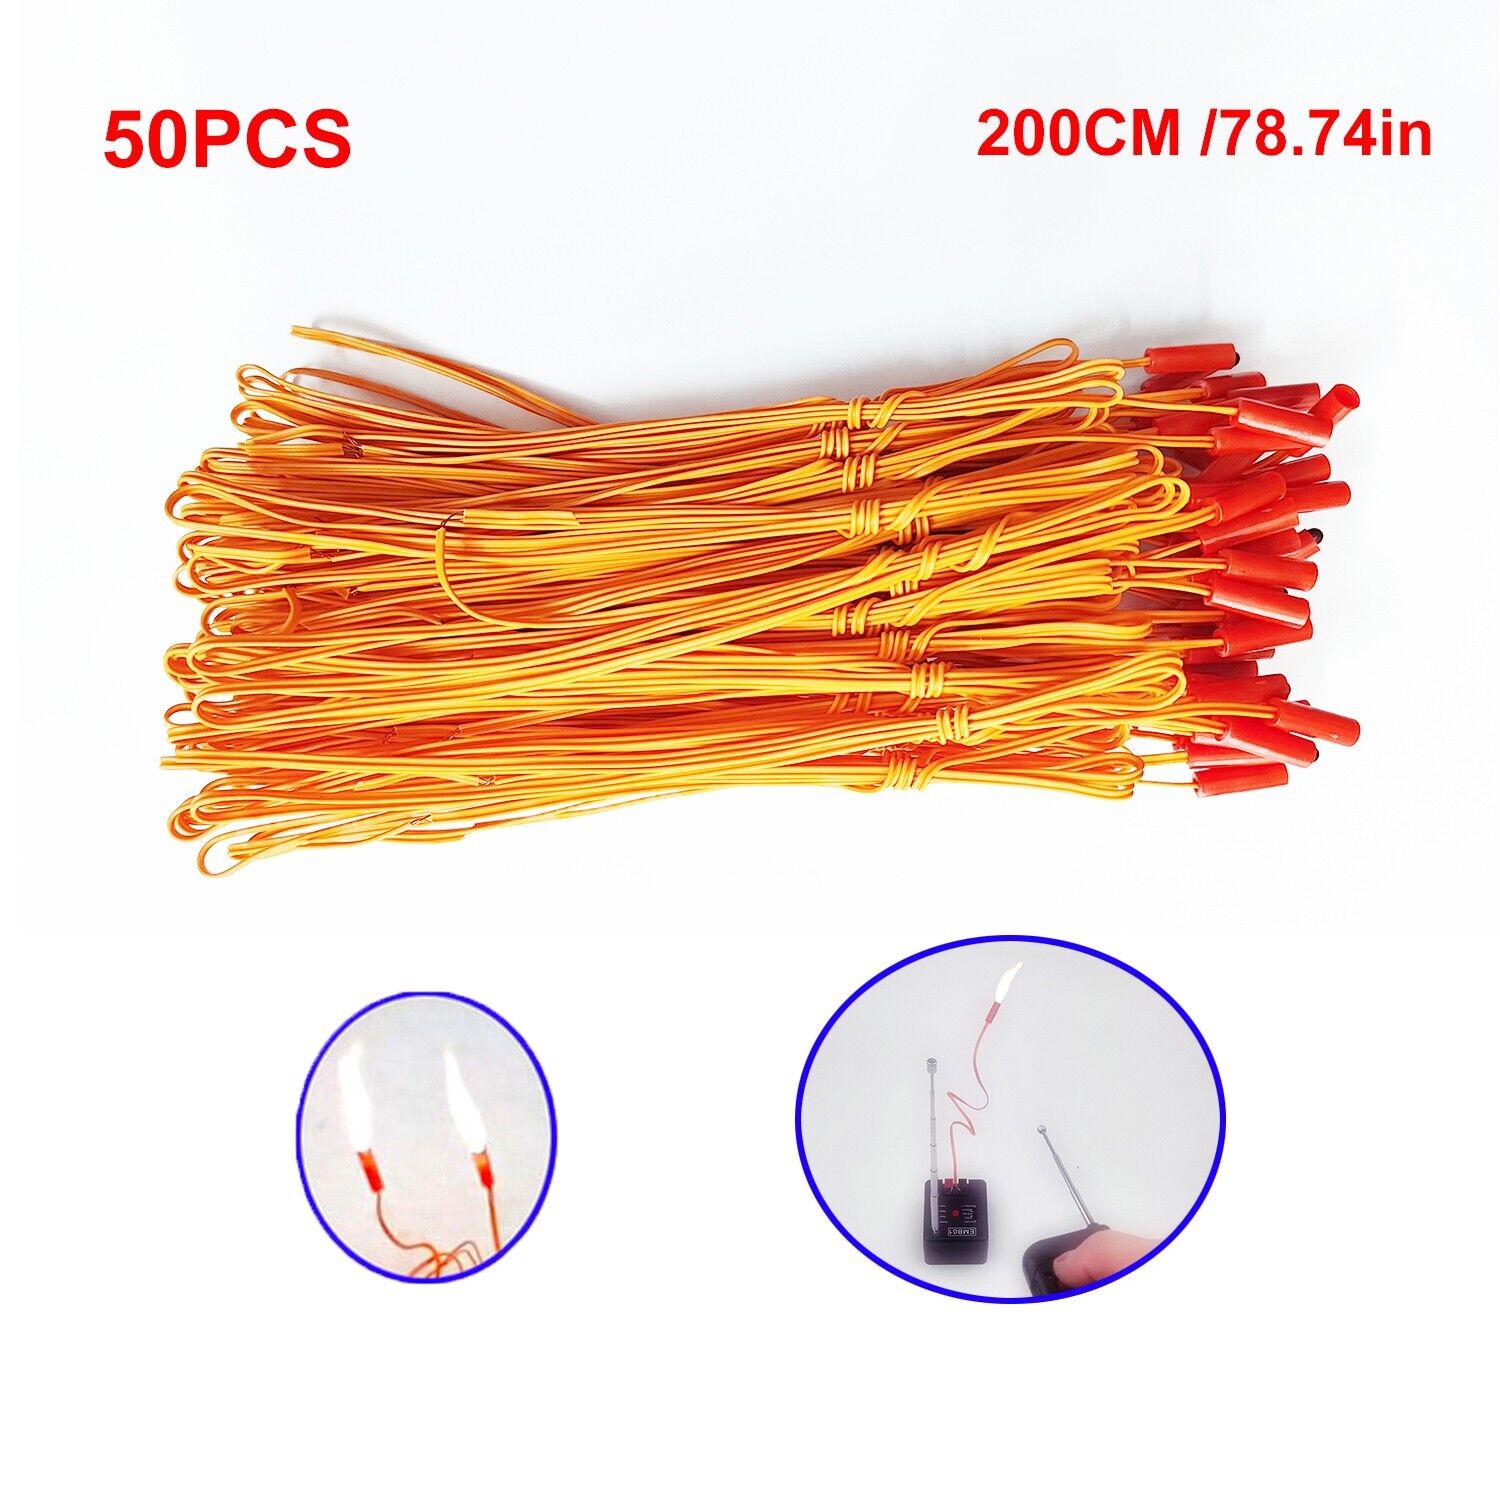 50  pcs 2M/78.74 in Electric Connecting Wire for Fireworks Firing System Igniter